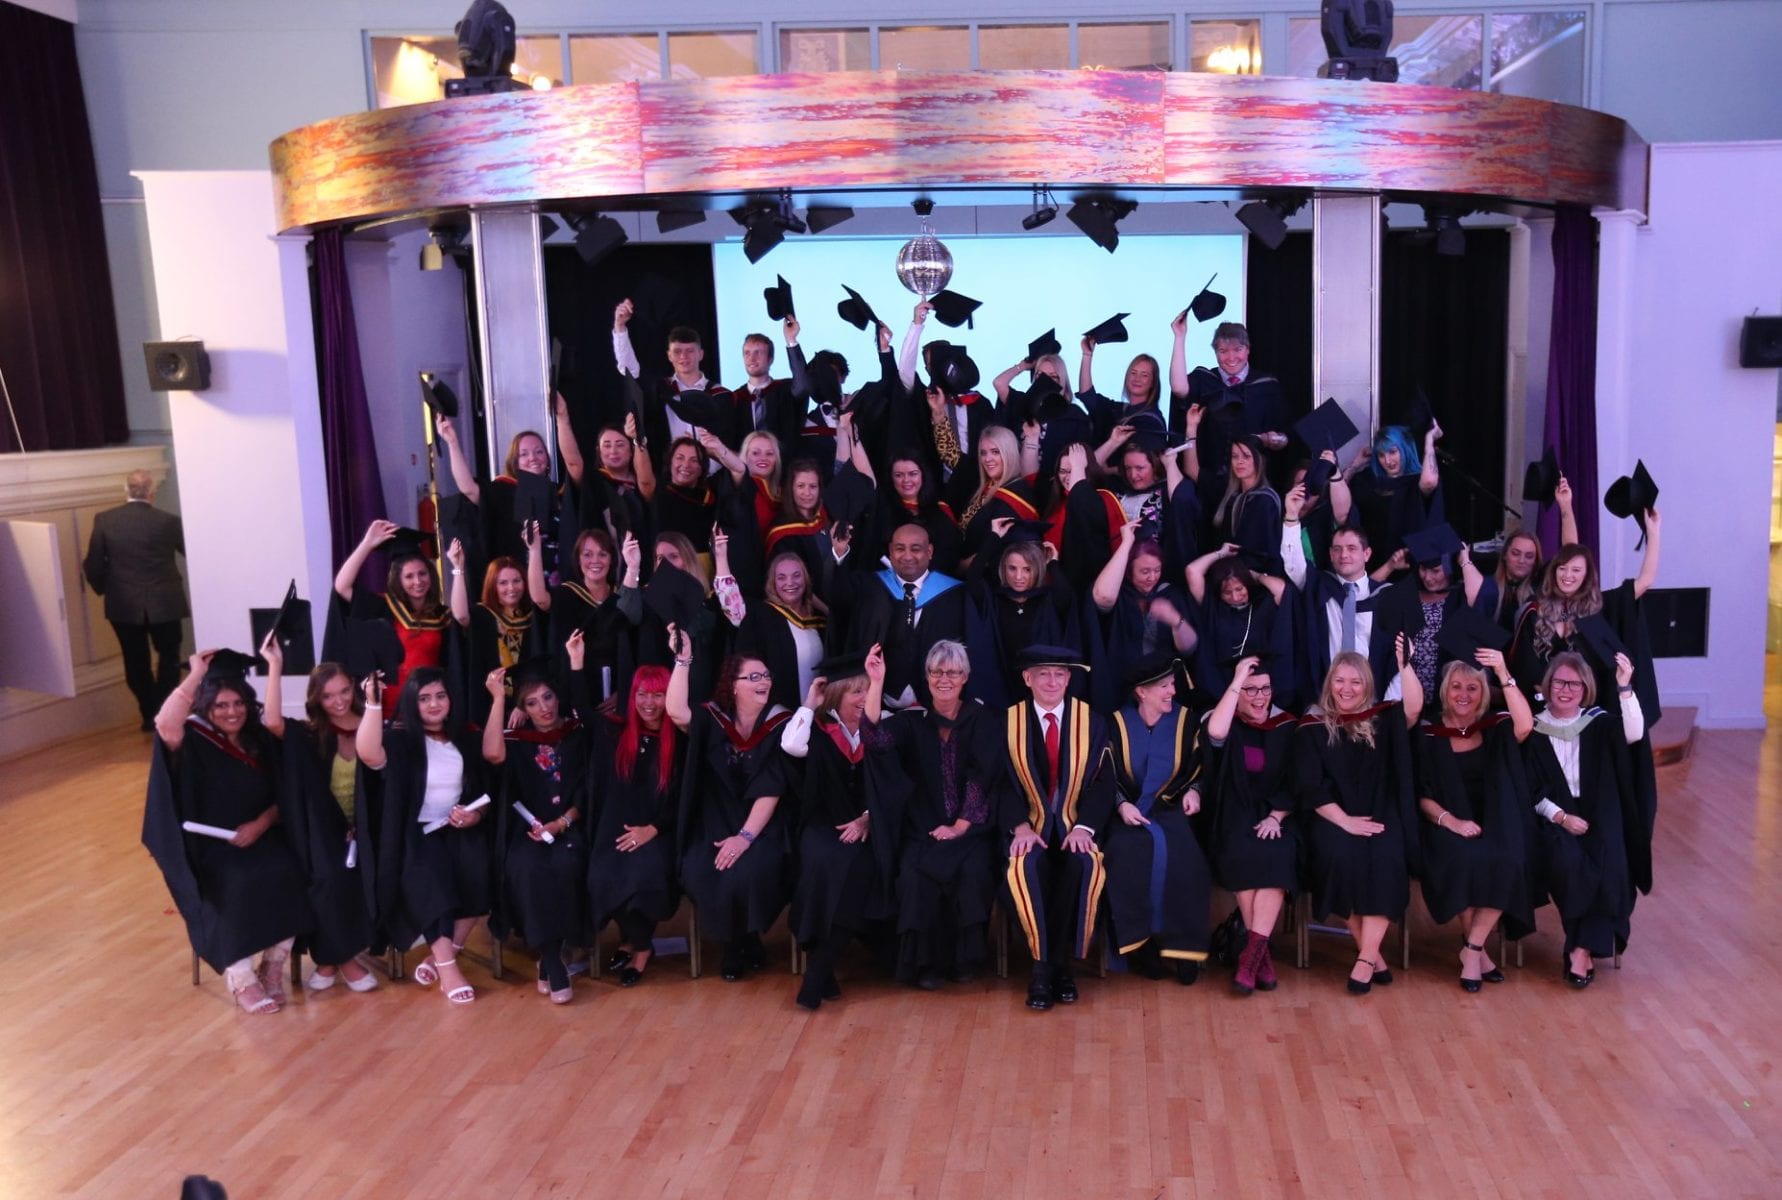 Accrington and Rossendale College – Higher Education Awards 2018